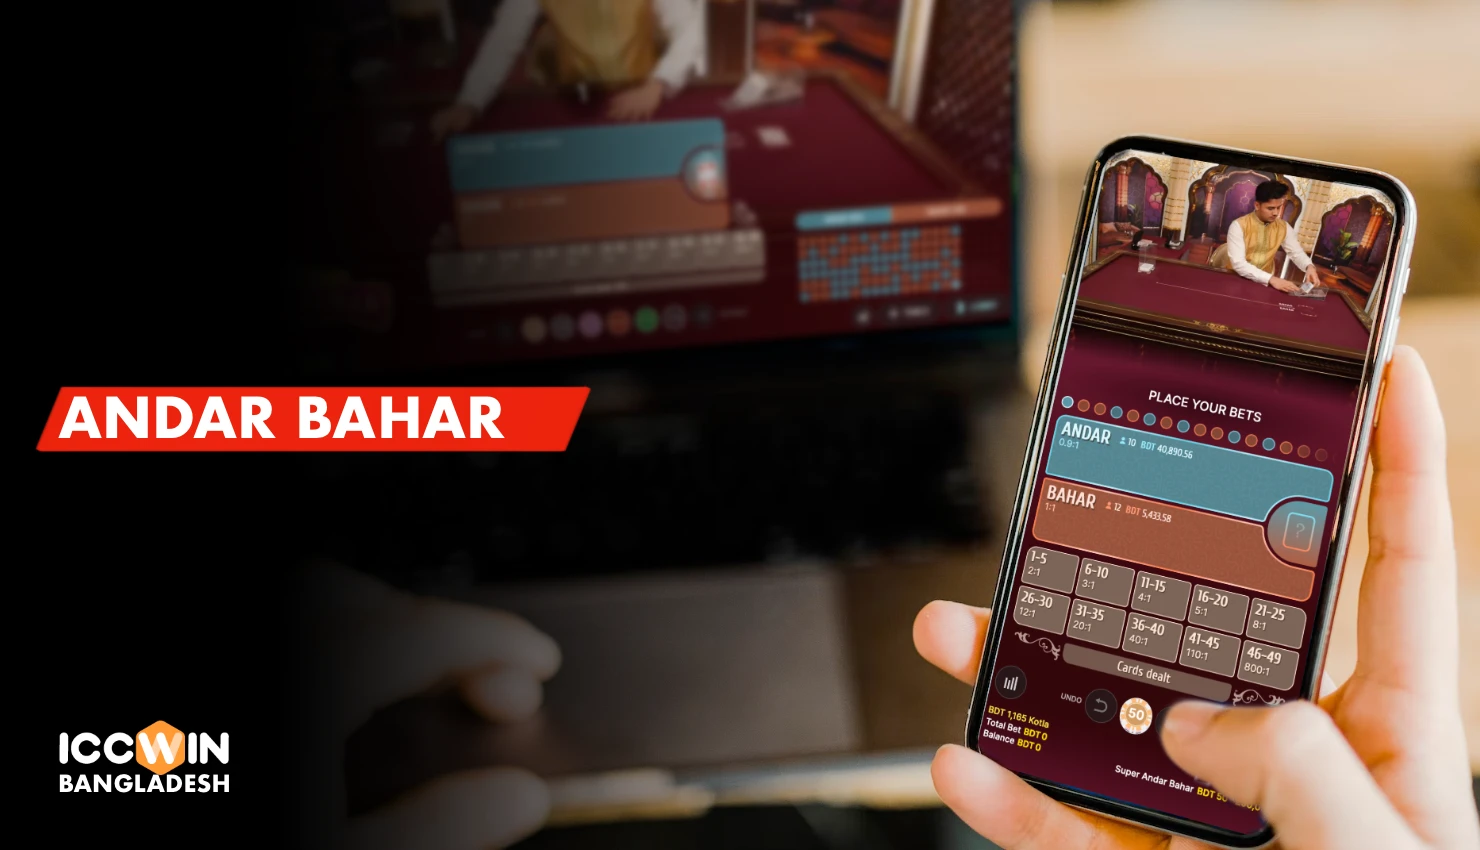 Andar Bahar is a simple yet interesting game that you can play on the Iccwin platform